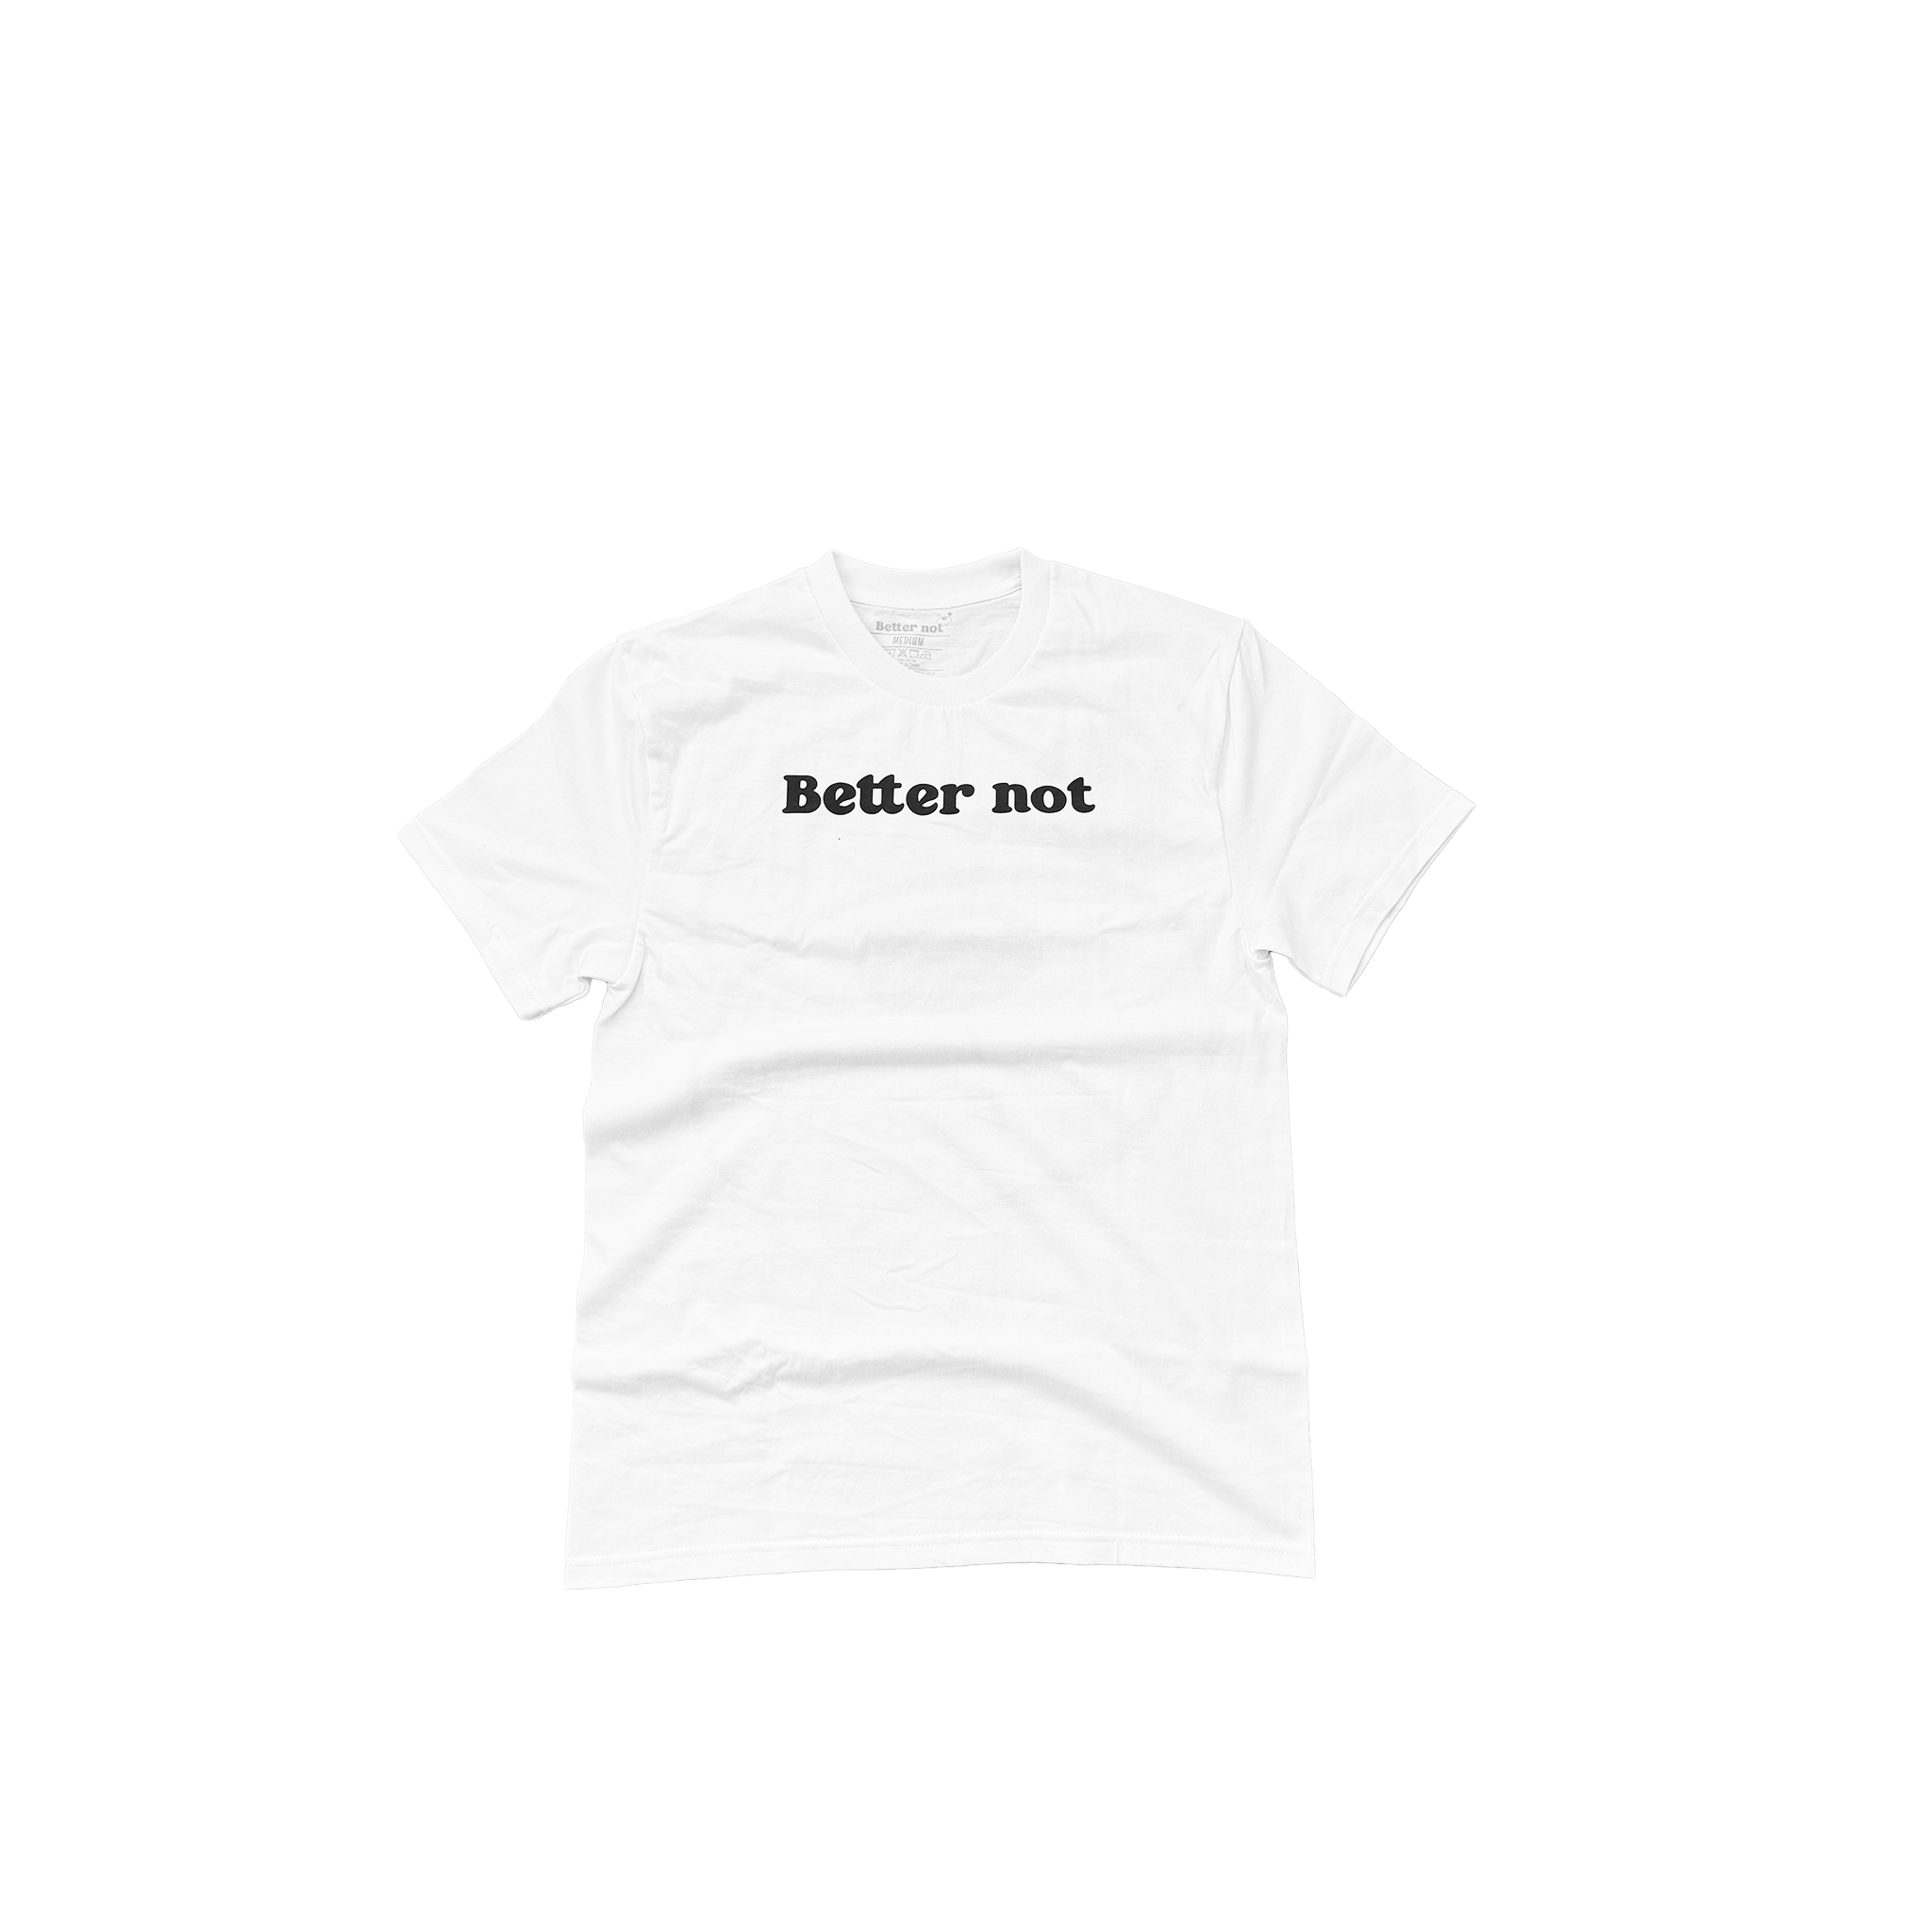 Bear Face Tee with the phrase "better not" printed in black text, laid flat on a gray carpeted surface.